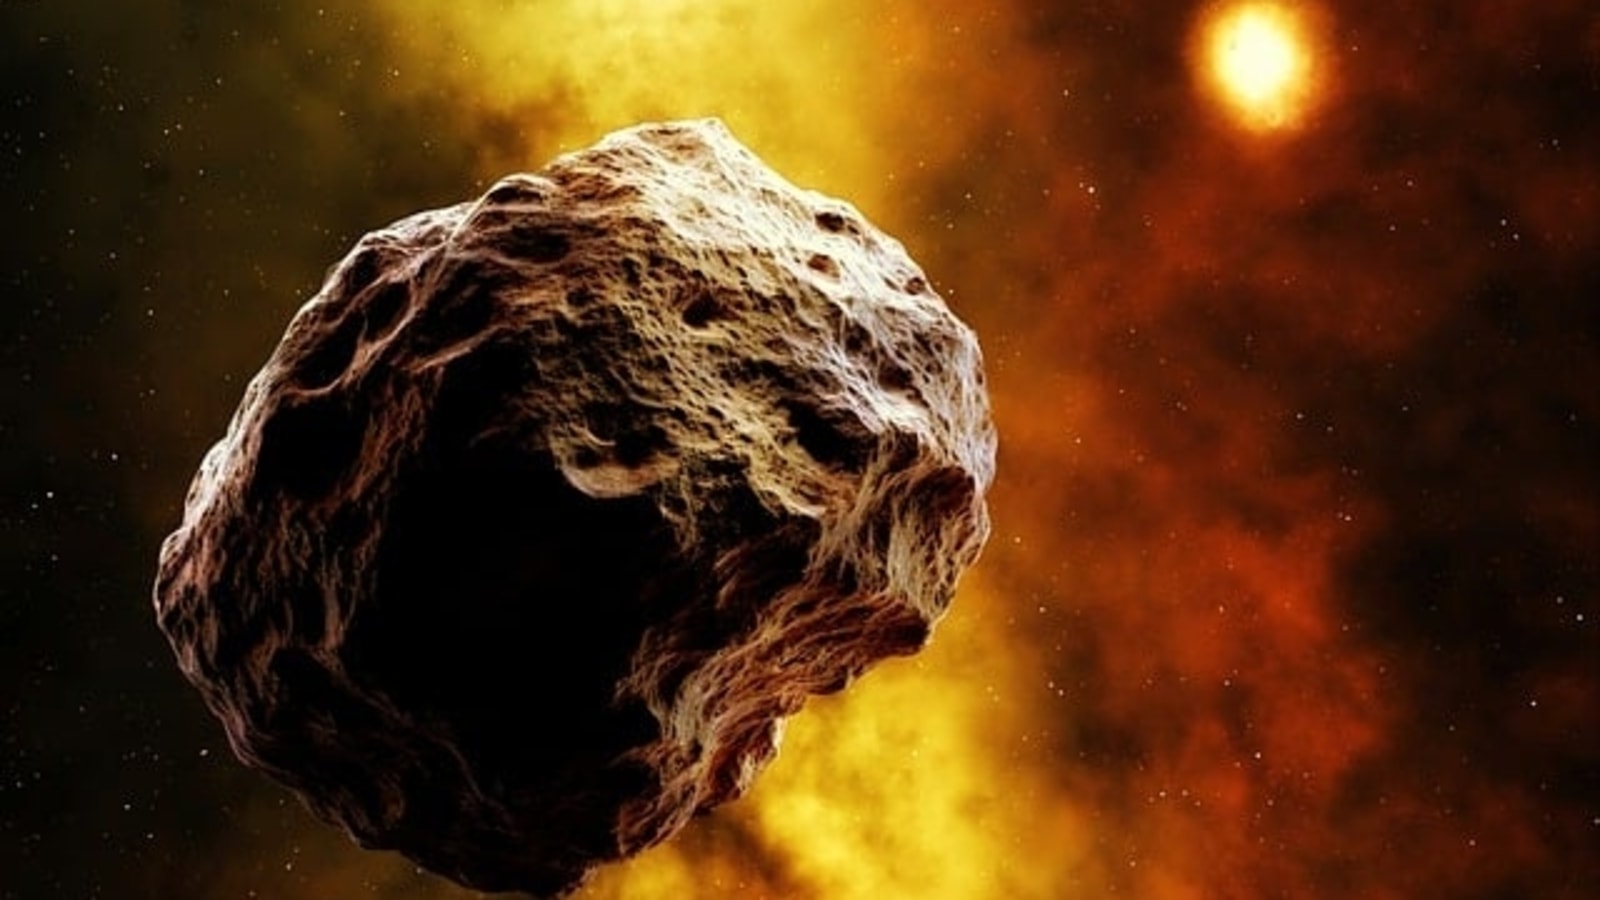 Apollo group asteroid predicted to go Earth in simply simply 3.2 mn km presently, reveals NASA